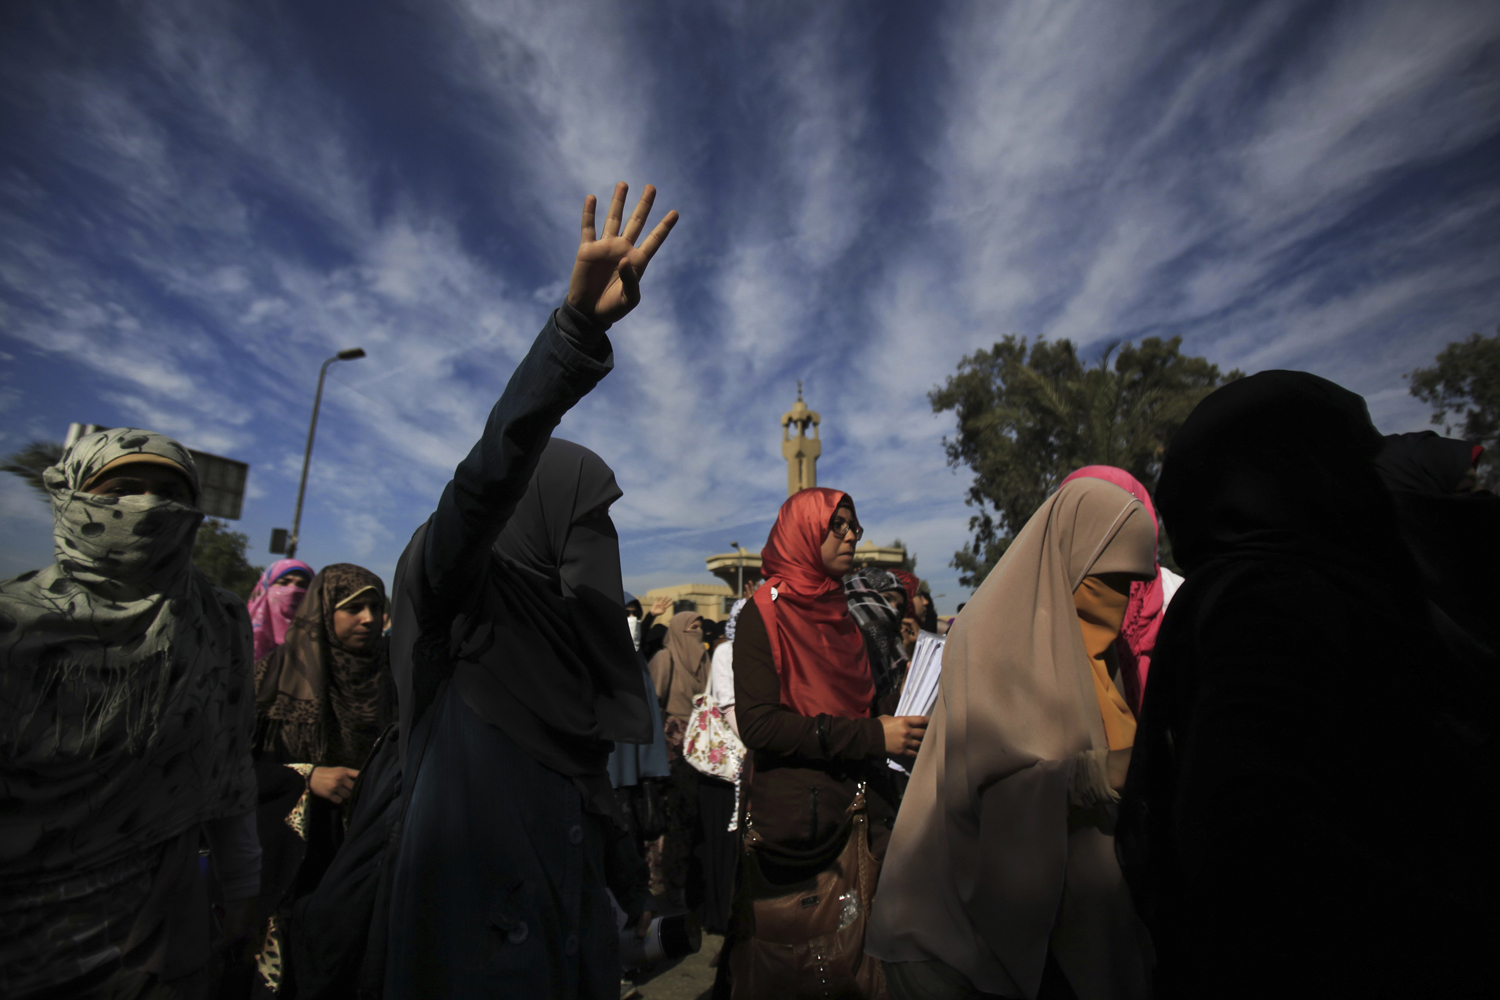 Nov.  21, 2013. Female students of Al-Azhar University, supporters of the Muslim Brotherhood and ousted Egyptian President Mohamed Mursi, shout slogans against the military and interior ministry while gesturing with four fingers after last night's clashes as they block Moustafa Al Nahas street in front of Al-Azhar University Campus at Cairo's Nasr City district.